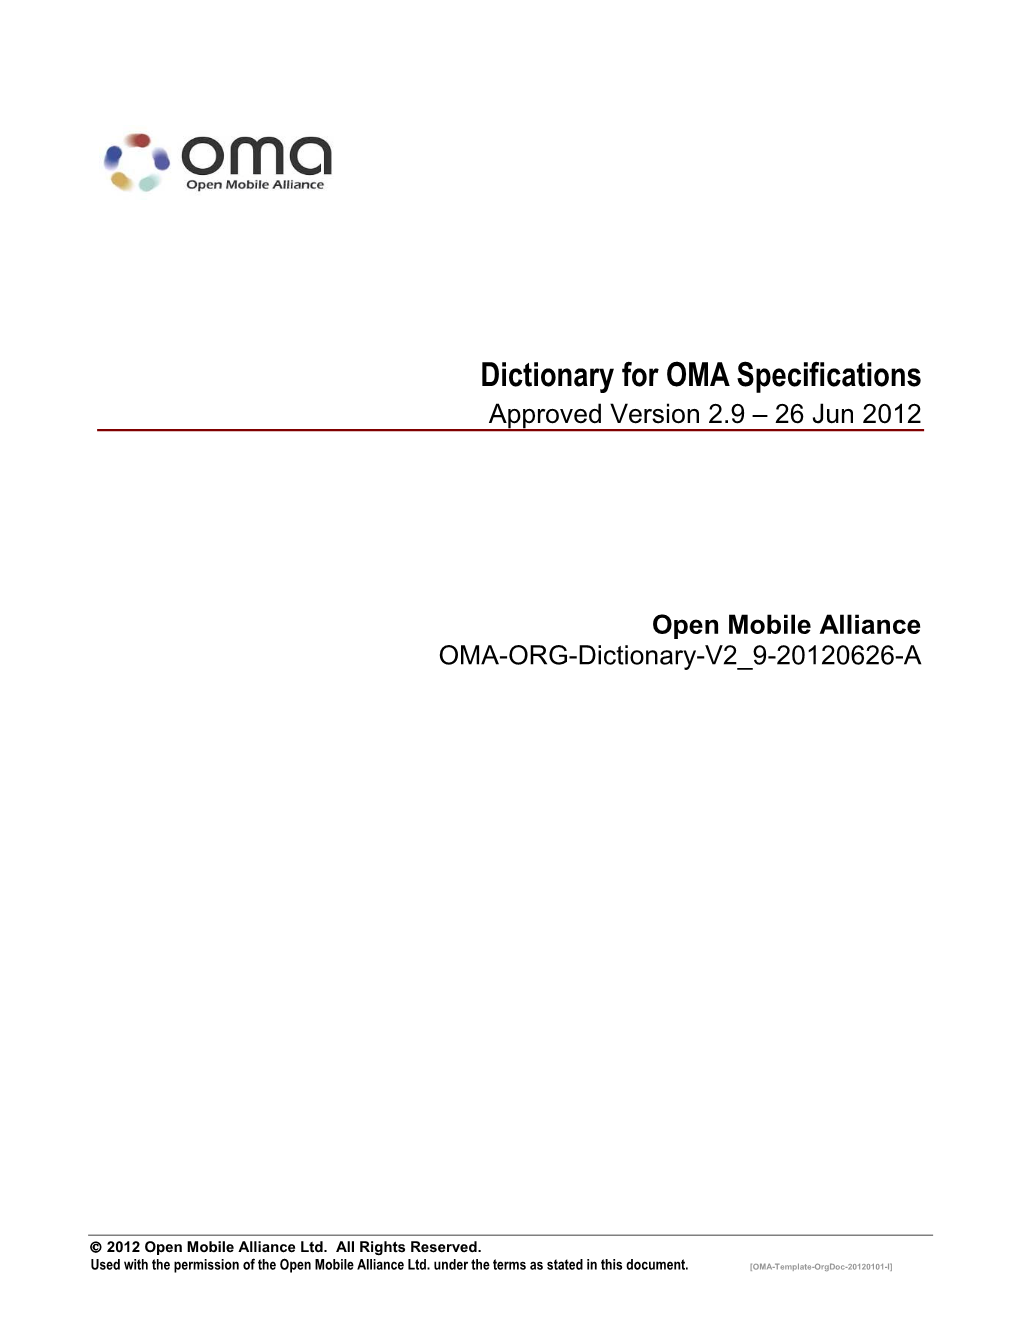 Dictionary for OMA Specifications Approved Version 2.9 – 26 Jun 2012